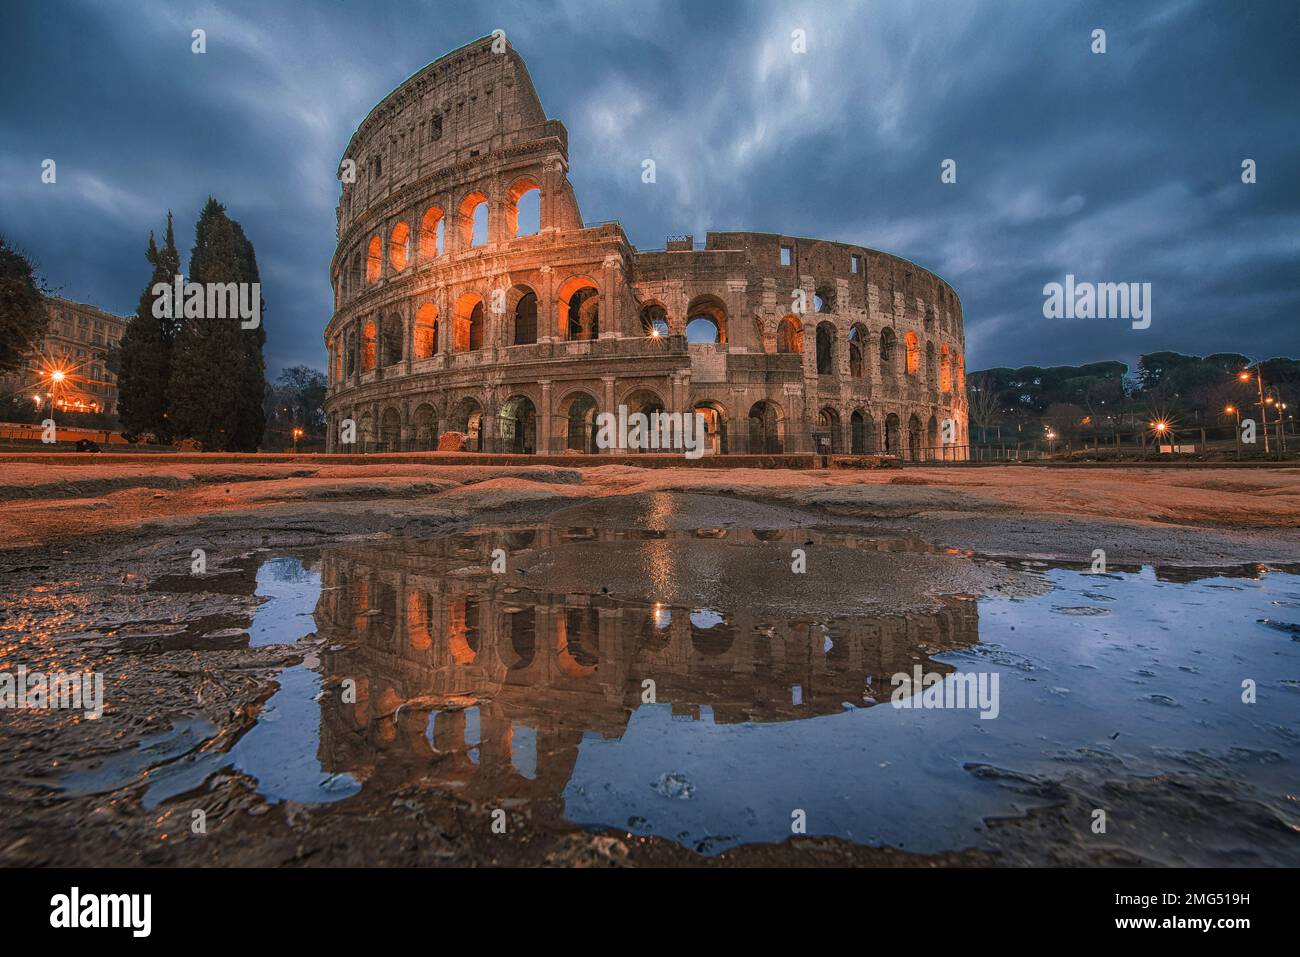 Colosseum at sunrise in Rome, Italy, Europe. Rome ancient arena of gladiator fights. Rome Colosseum is the best known landmark of Rome and Italy Stock Photo